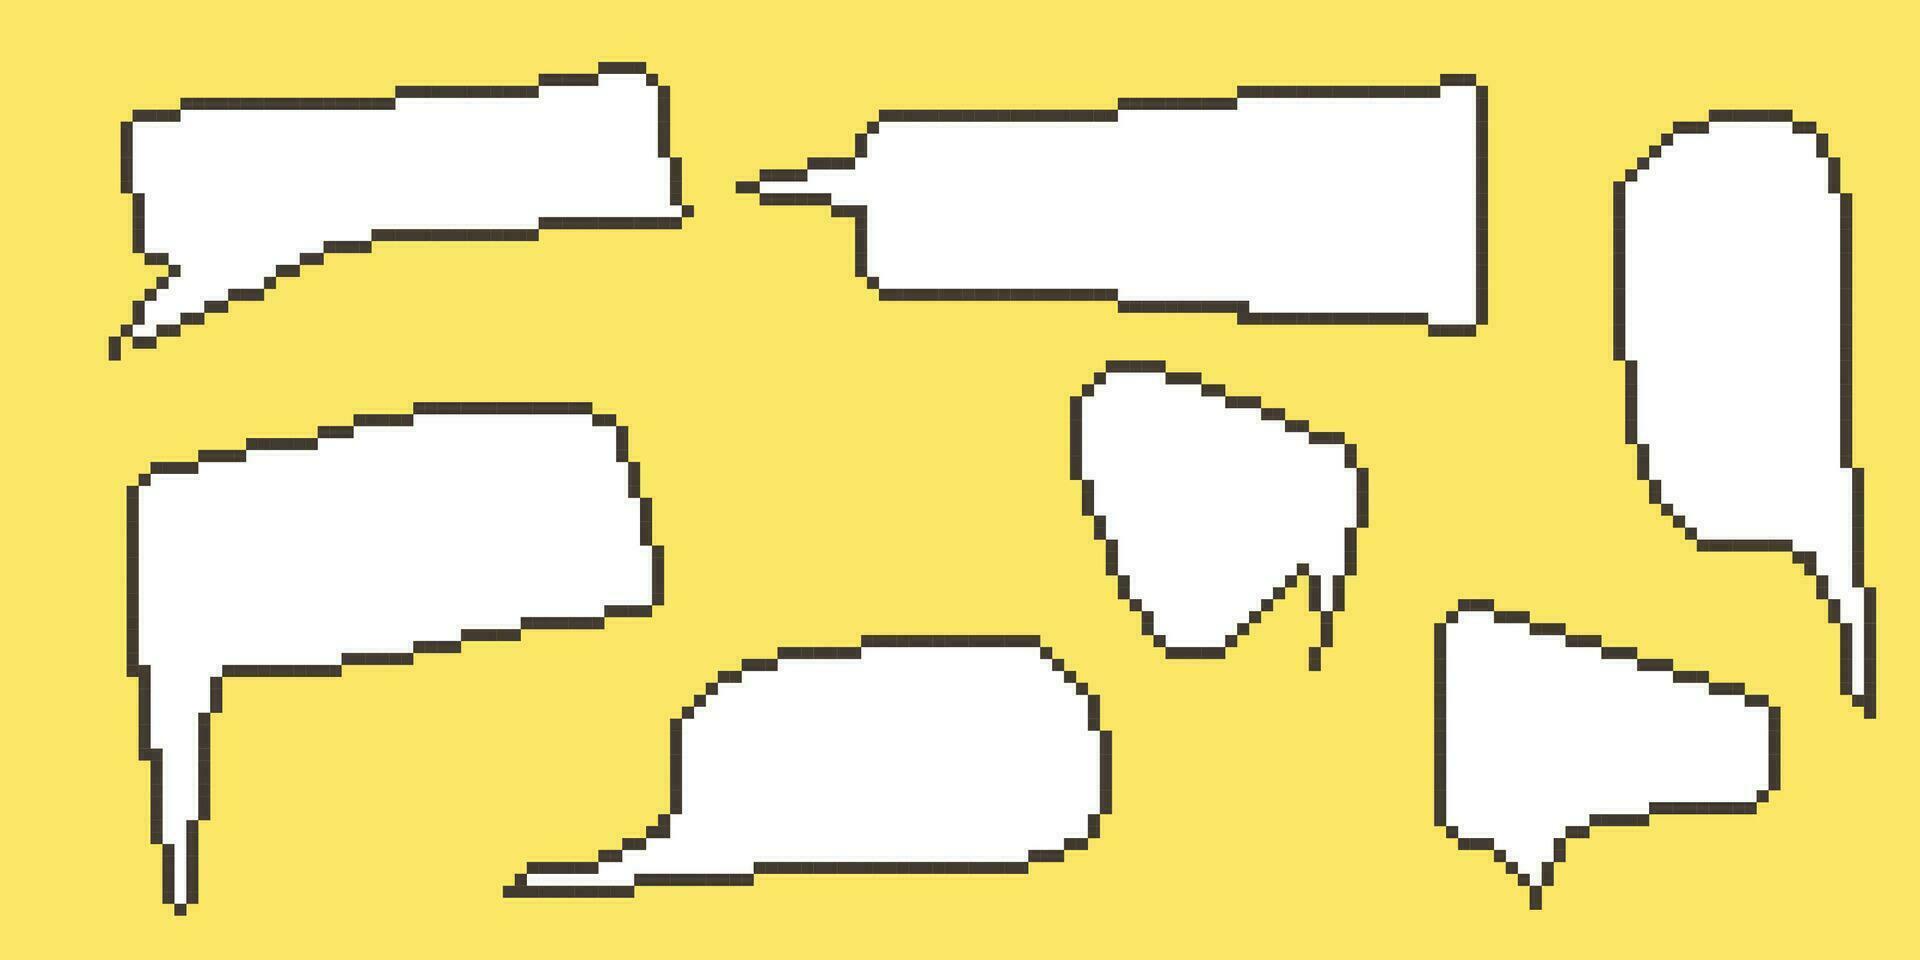 Pixel speech bubble Collection chart dialogue boxes. Retro game 8 bit line text box. Yellow, Black and white color empty pixelated message bar. Quote cloud frames. Flat design vector illustration